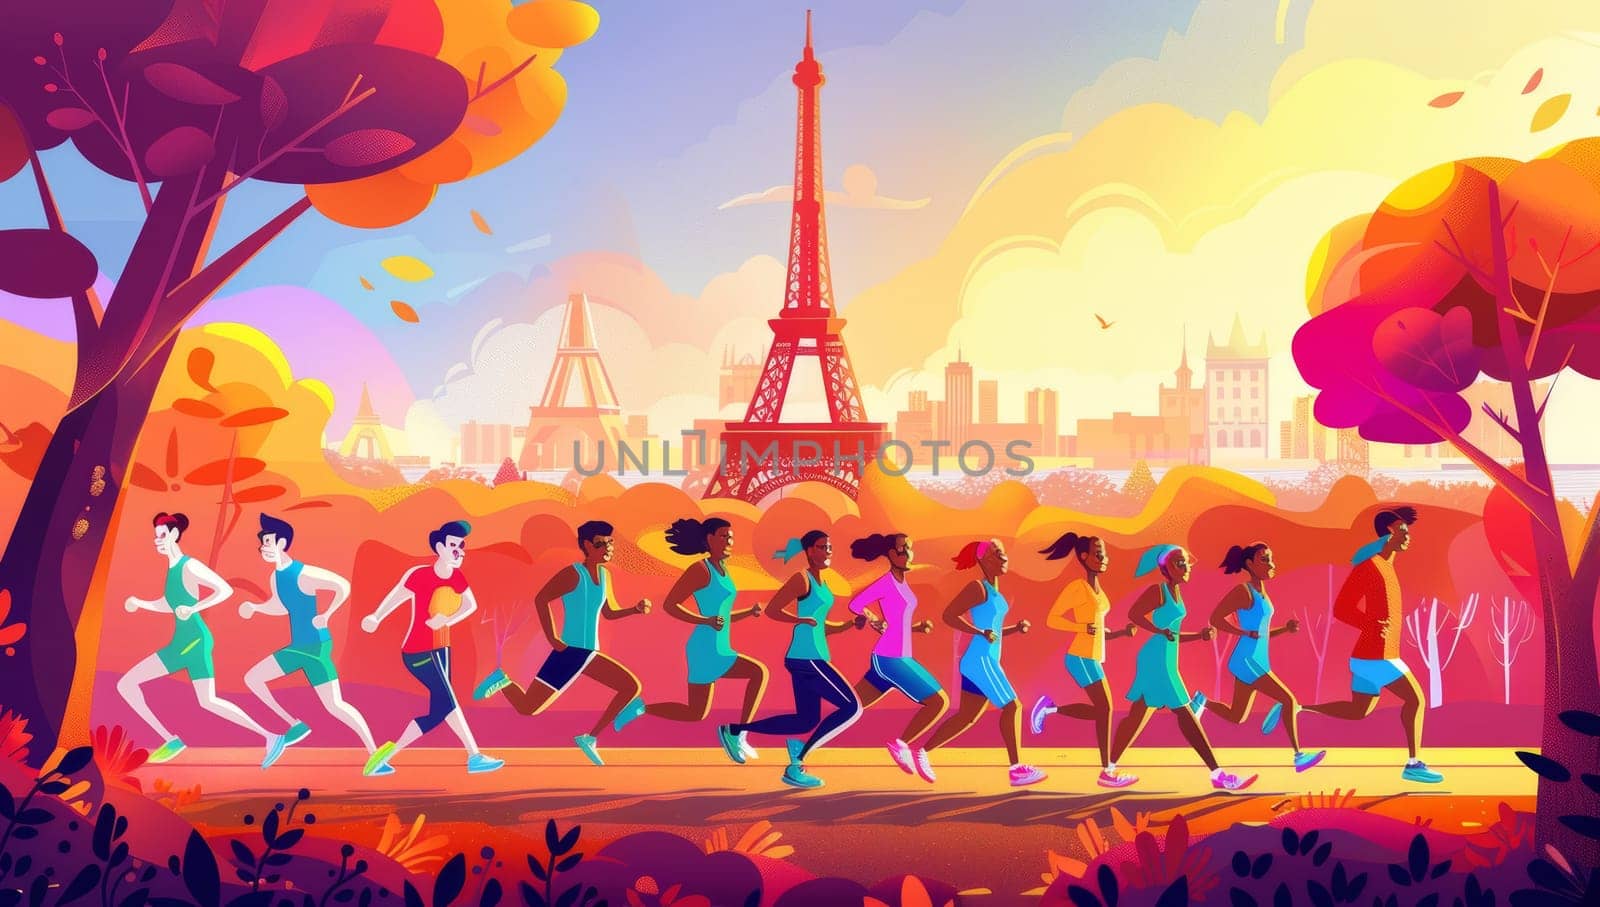 Colorful illustration of athletes running a marathon with the Paris skyline and Eiffel Tower in the background during autumn